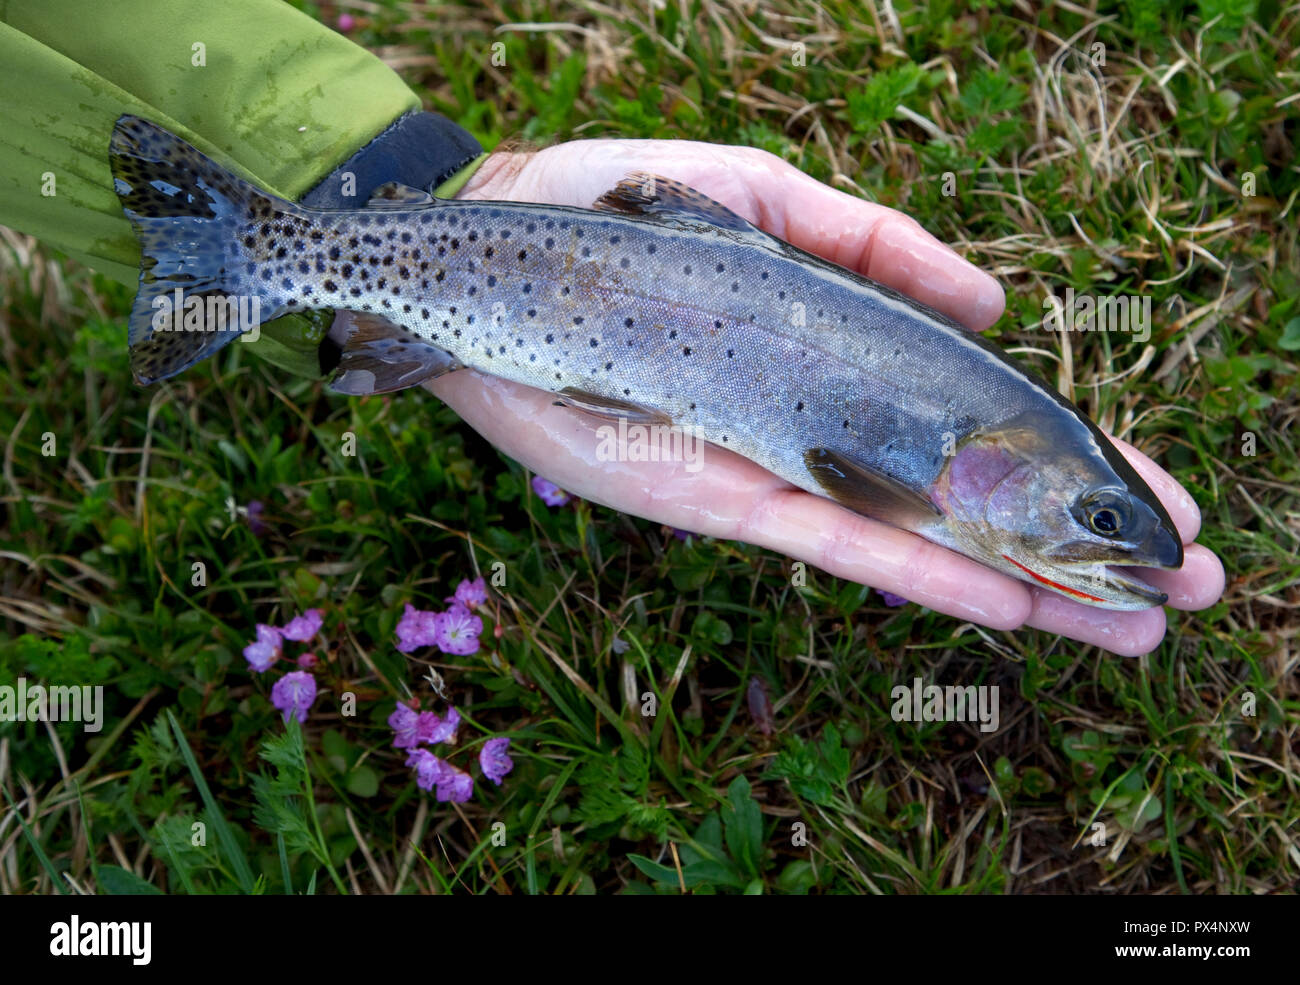 Fly fishing for trout in the Colorado mountains, USA. Stock Photo